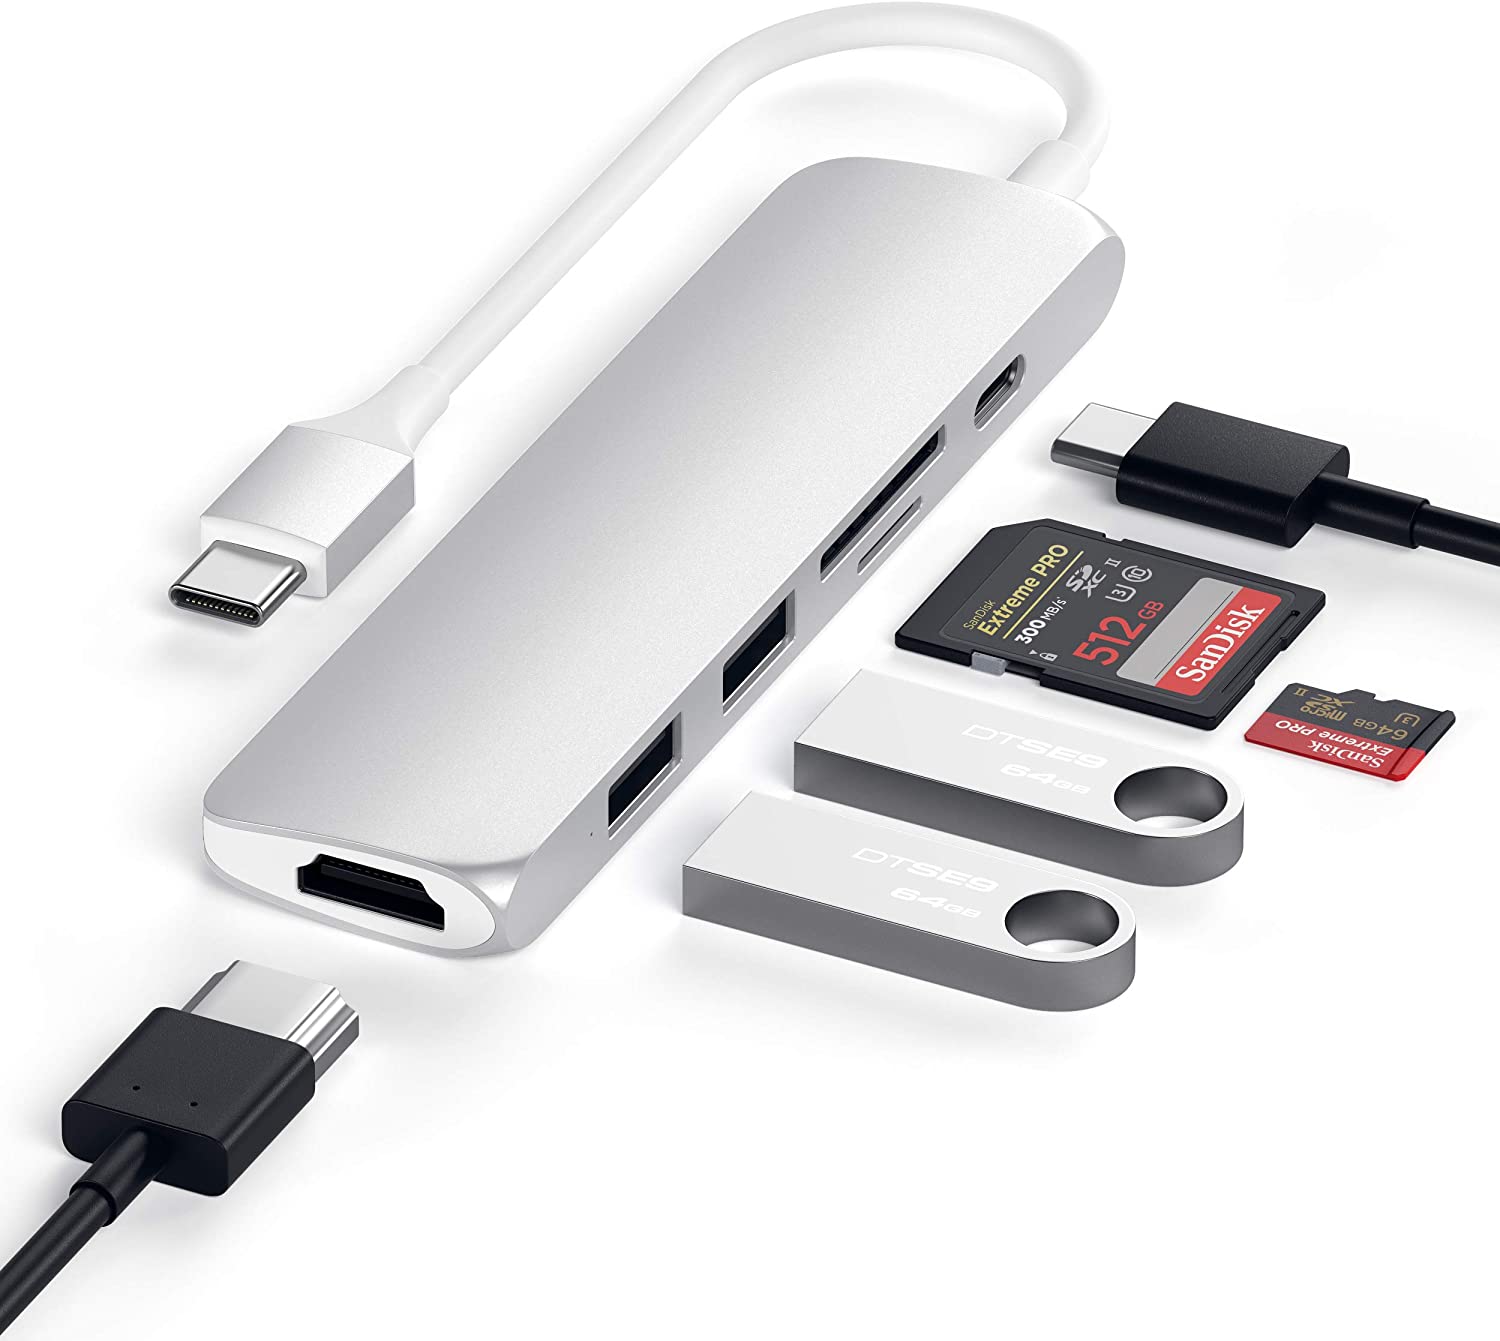 Type-C 2-in-1 Aluminum USB Hub with Ethernet - Satechi